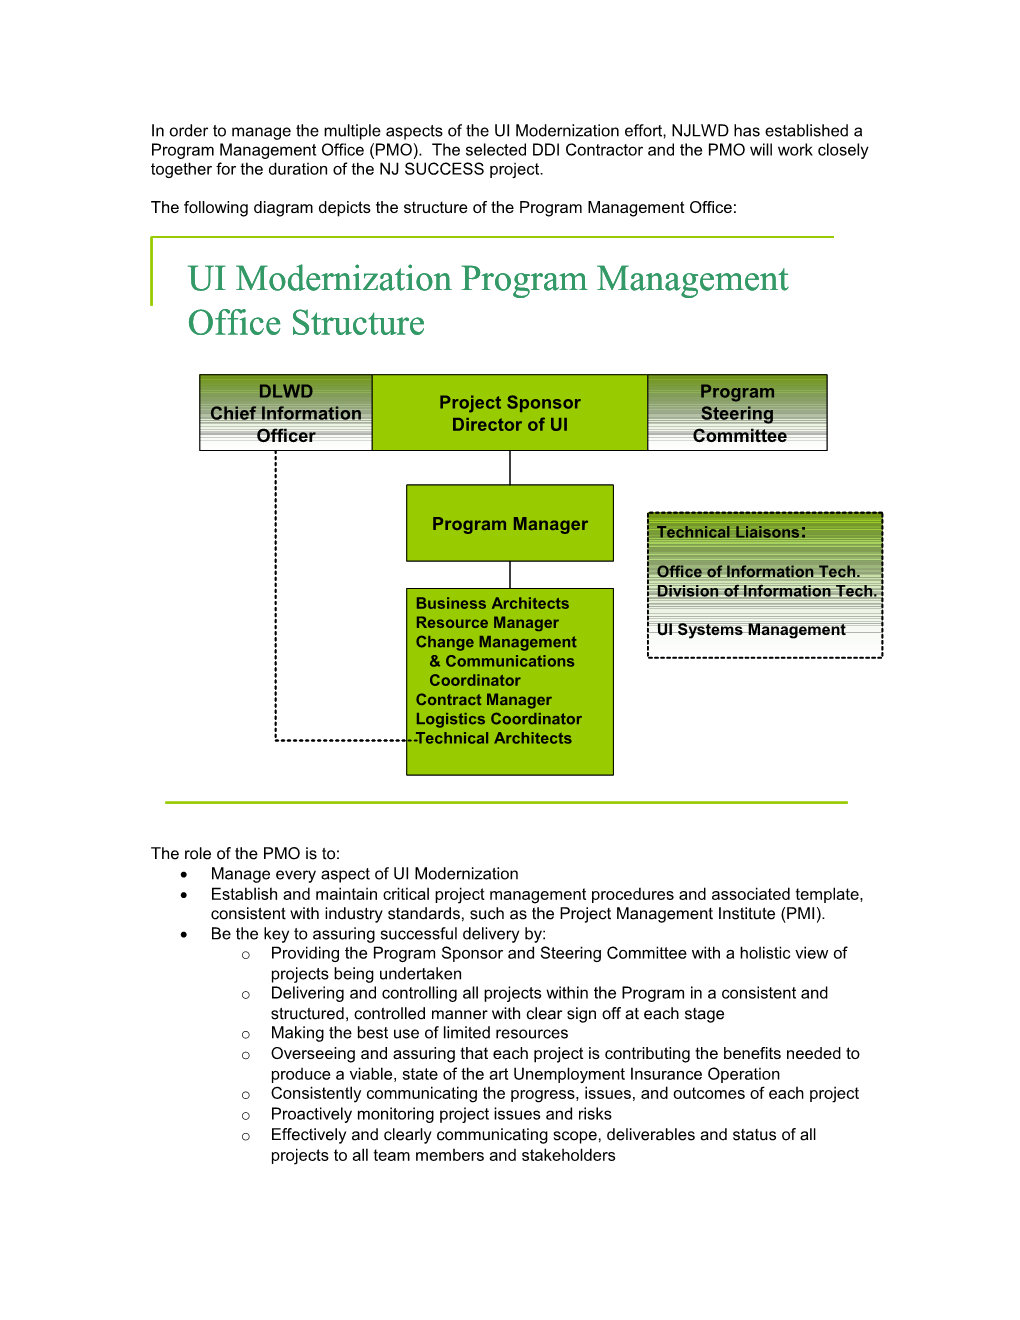 In Order to Manage the Multiple Aspects of the UI Modernization Effort, NJLWD Has Established